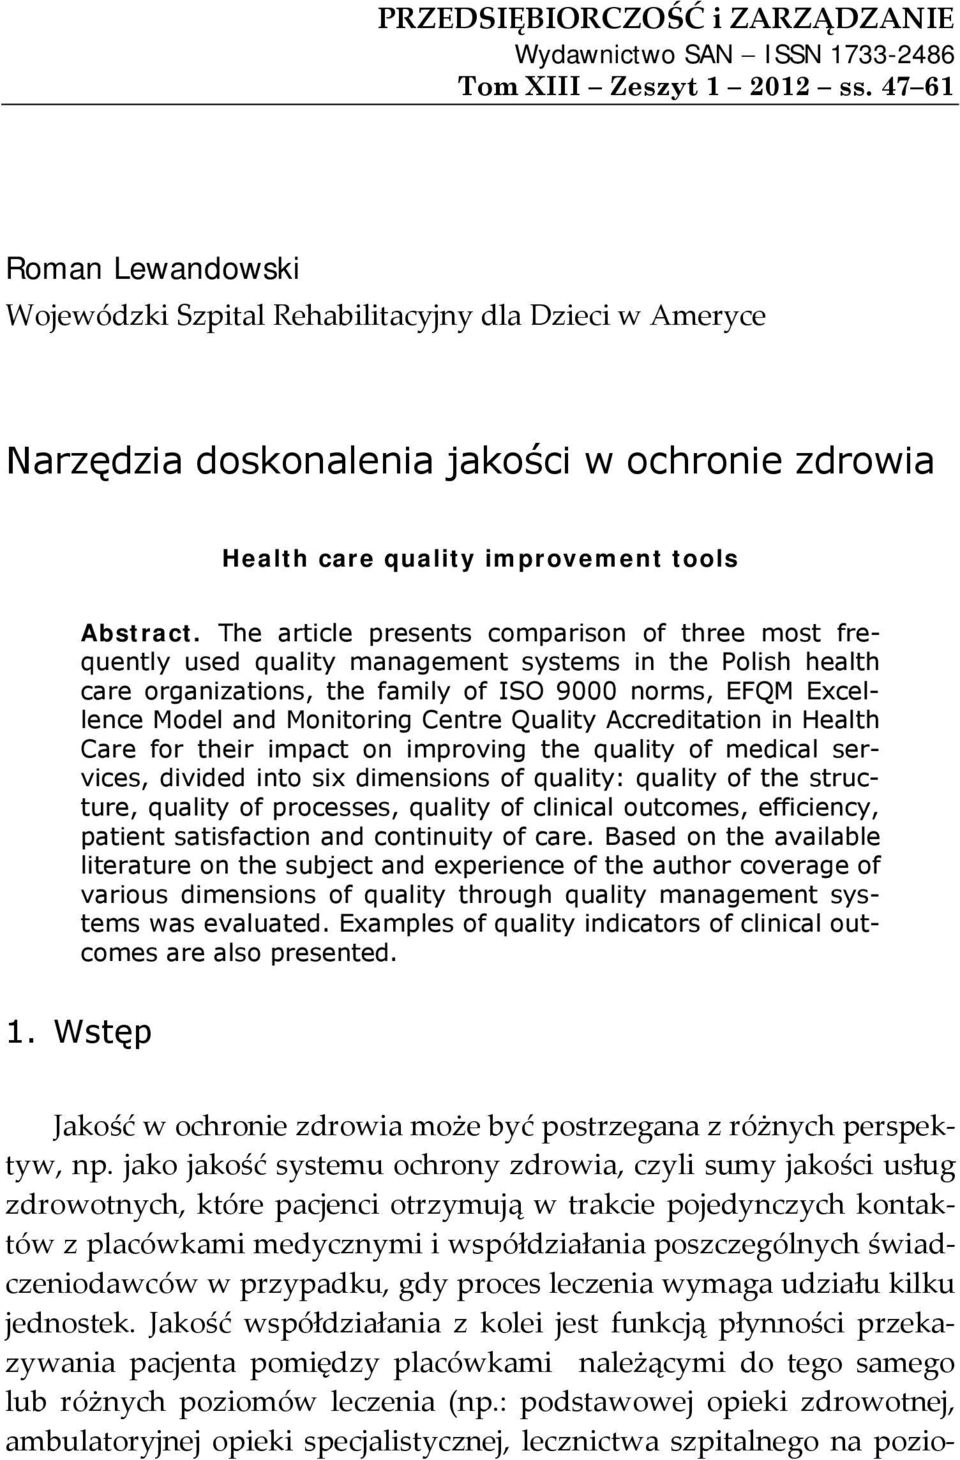 The article presents comparison of three most frequently used quality management systems in the Polish health care organizations, the family of ISO 9000 norms, EFQM Excellence Model and Monitoring